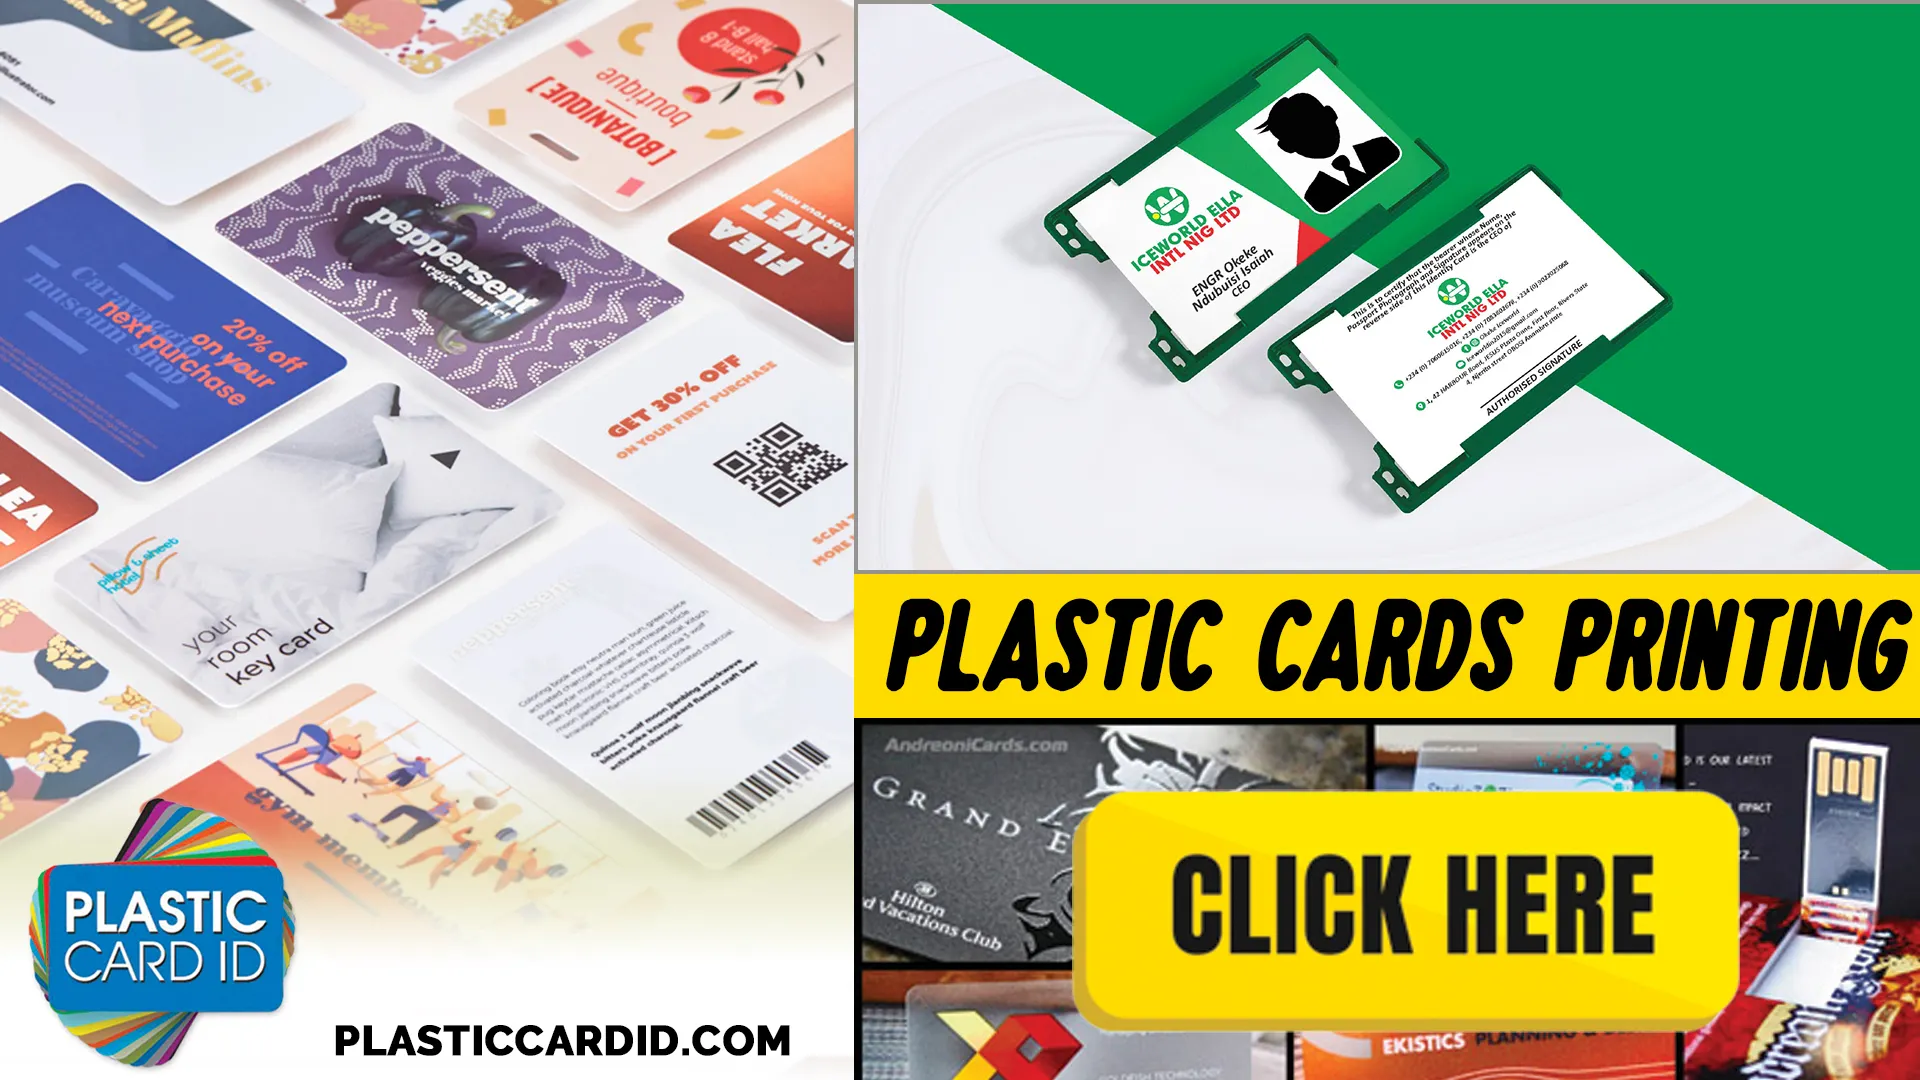 Embracing Plastic Card ID
's Unwavering Support and Customer Service